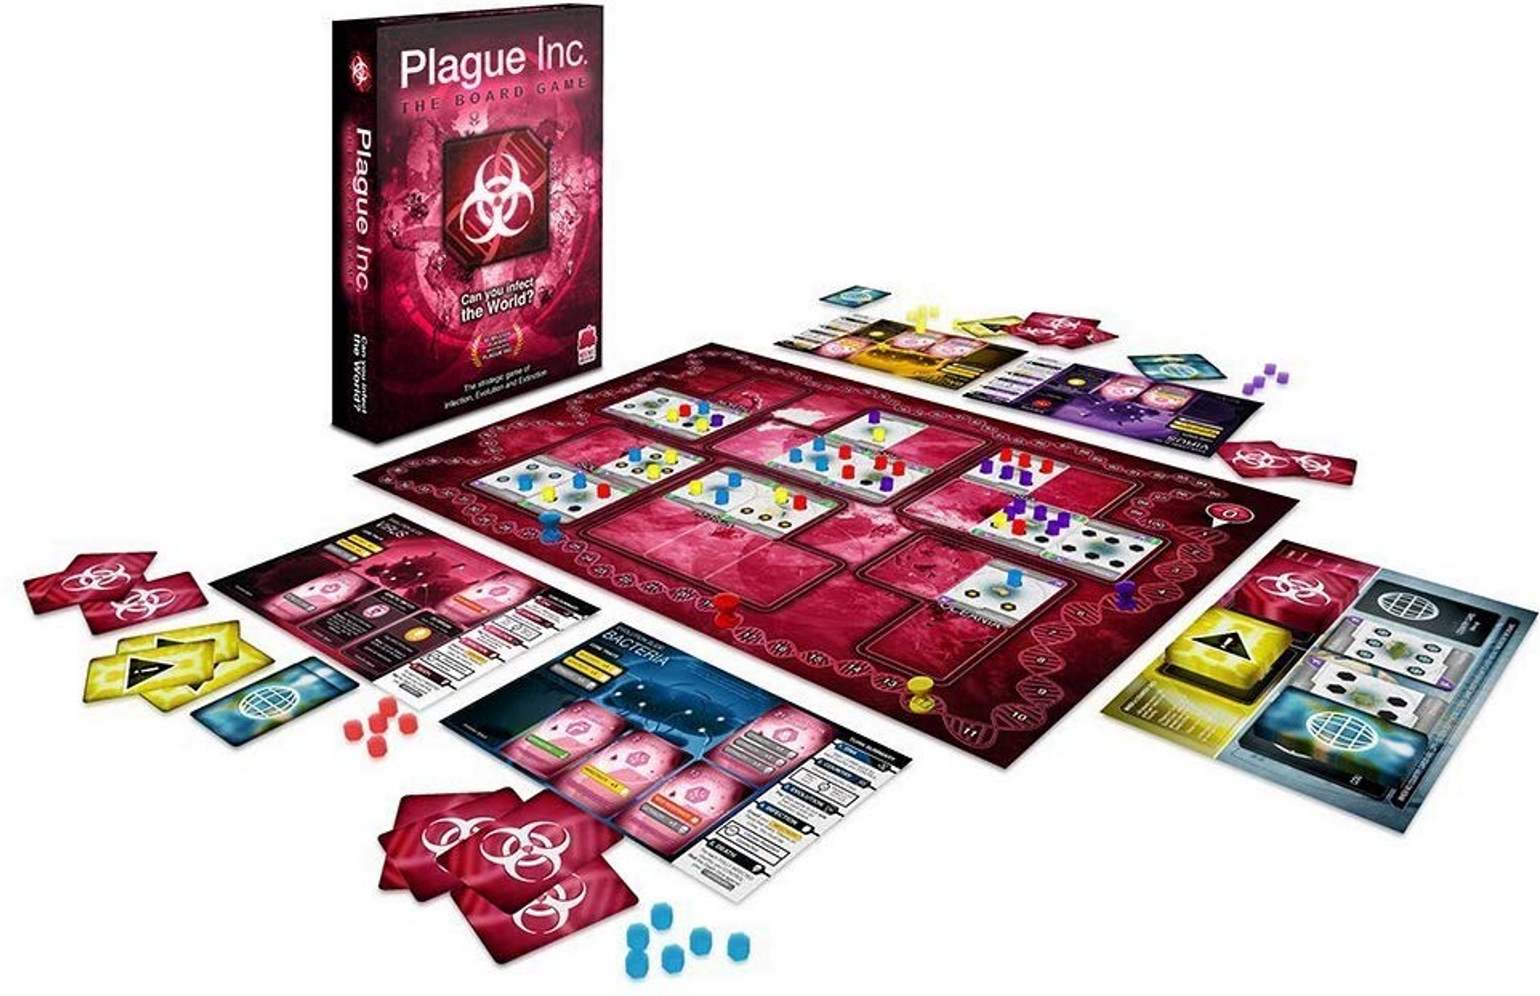 Board Game Review: 'Pandemic' vs 'Plague Inc.' | Project-Nerd